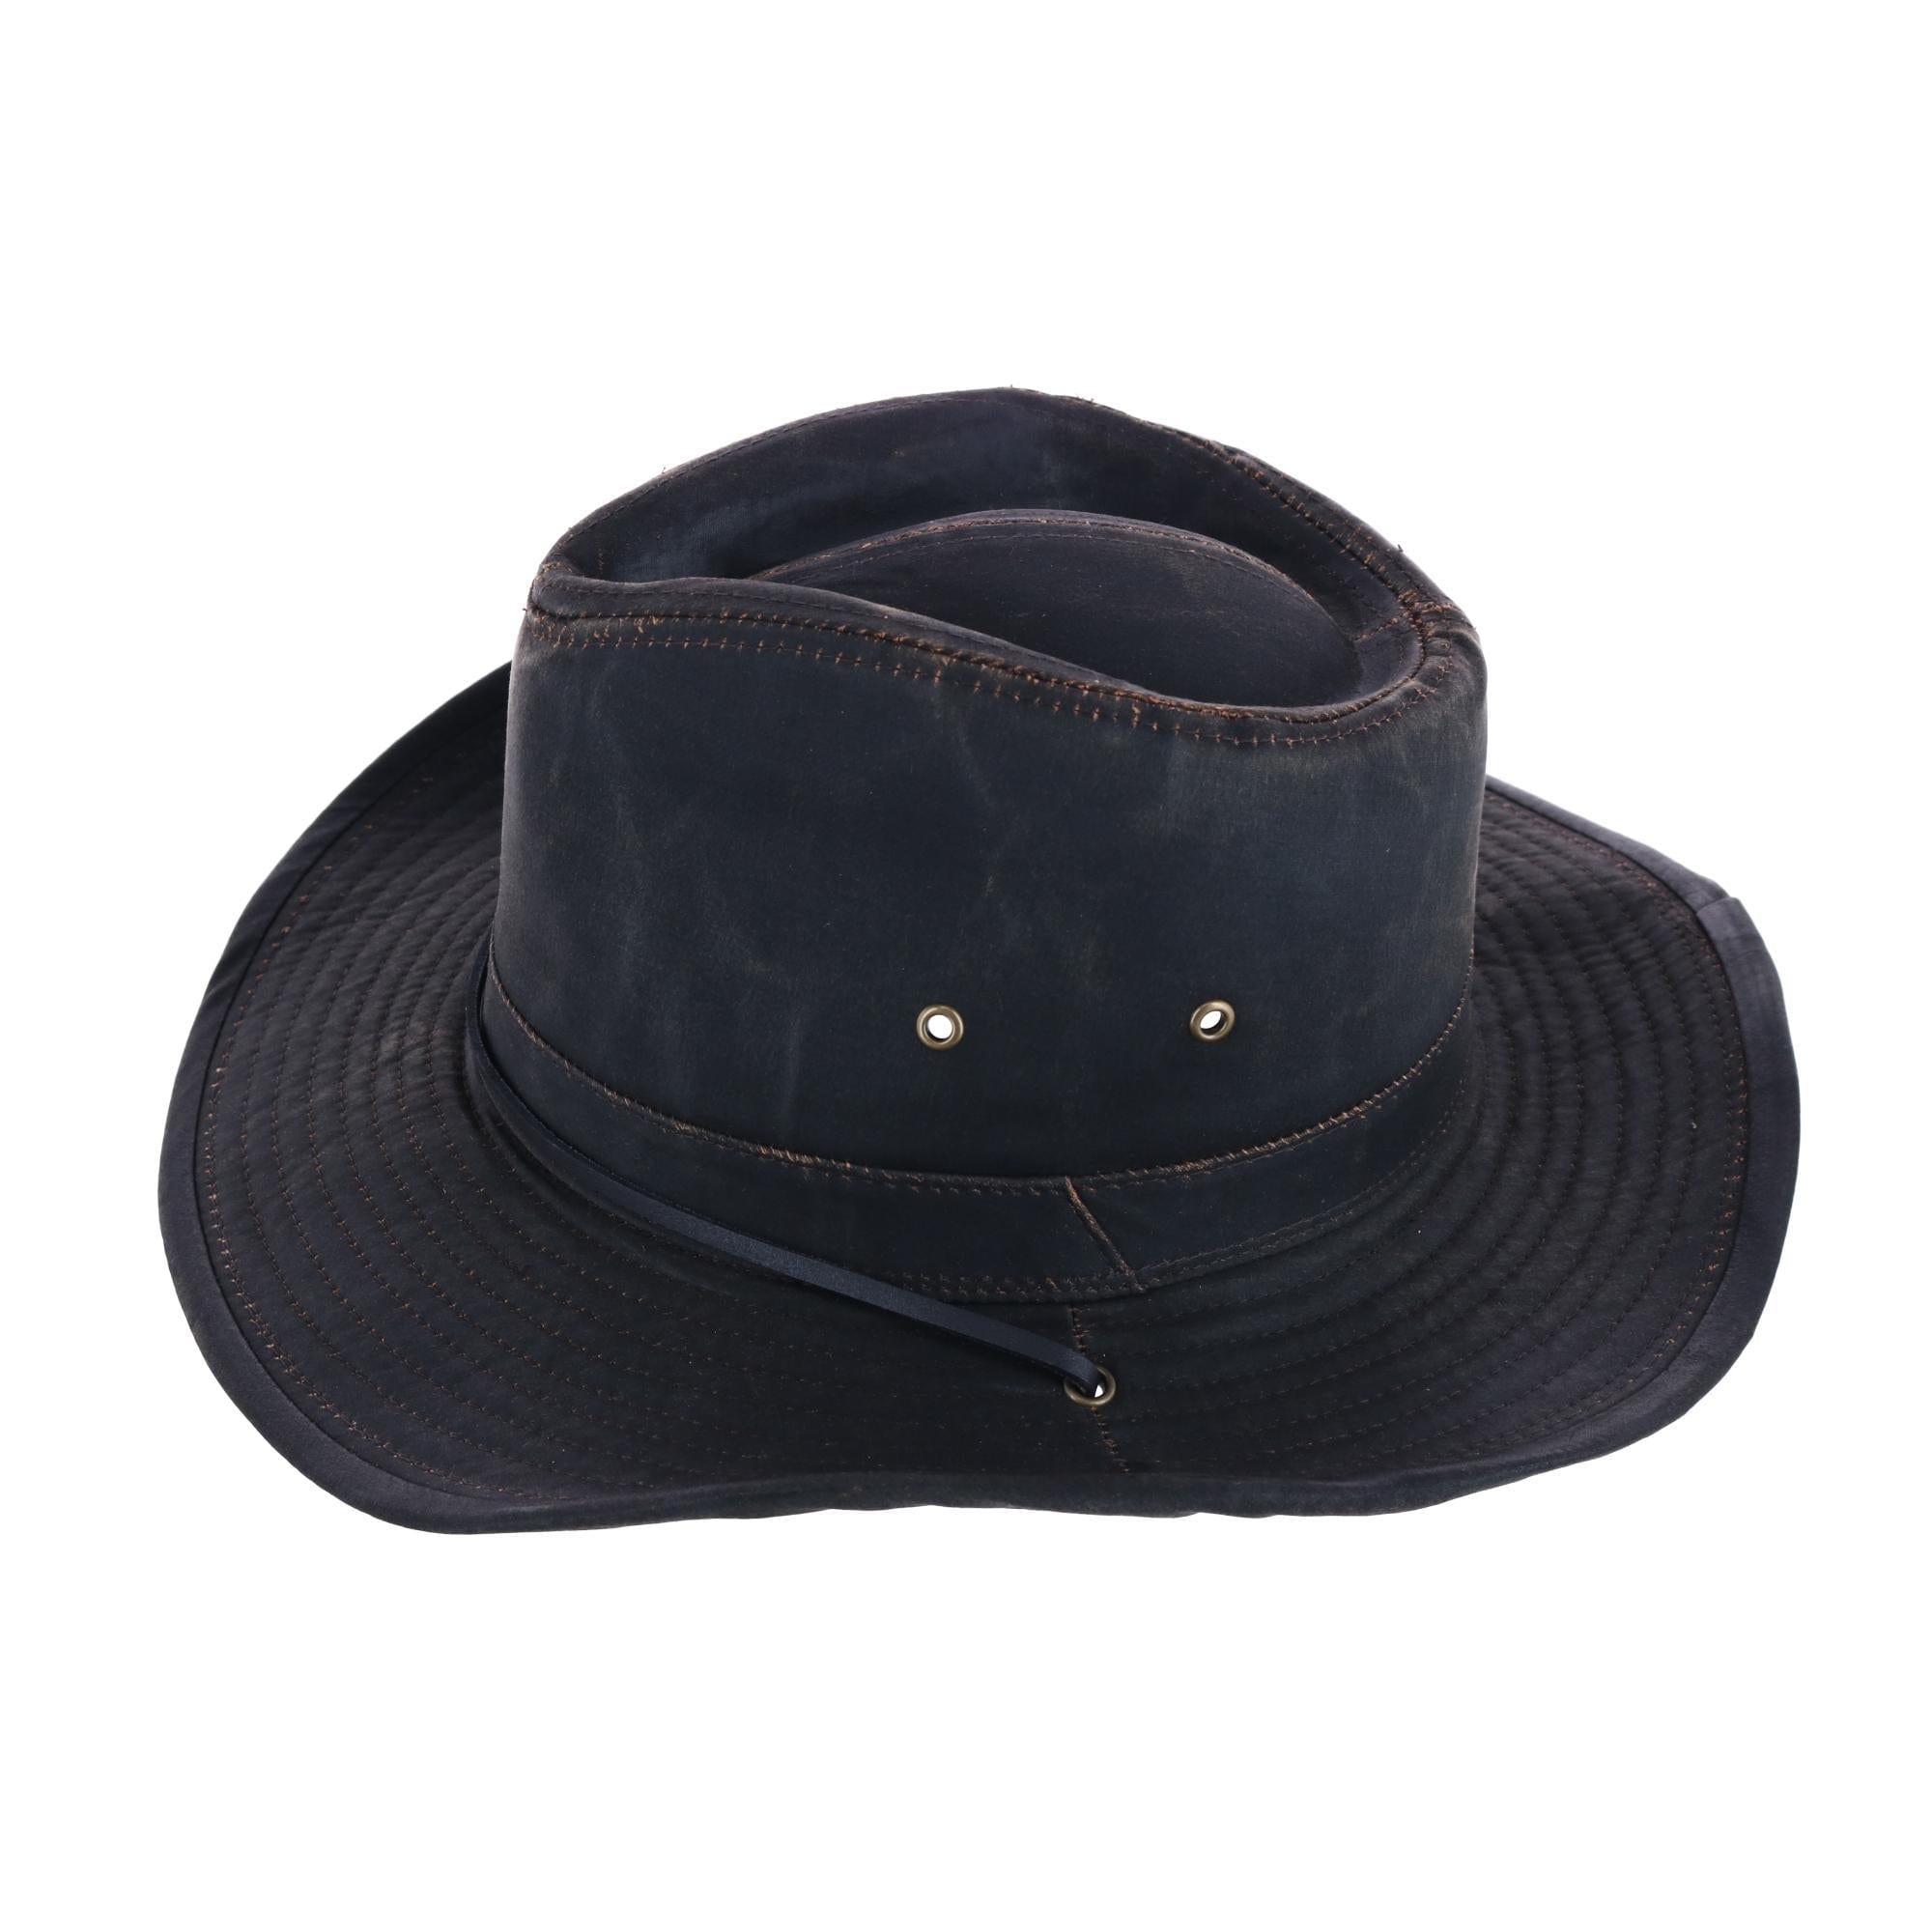 Men's Boondocks Weathered Outback Hat by Dorfman Pacific